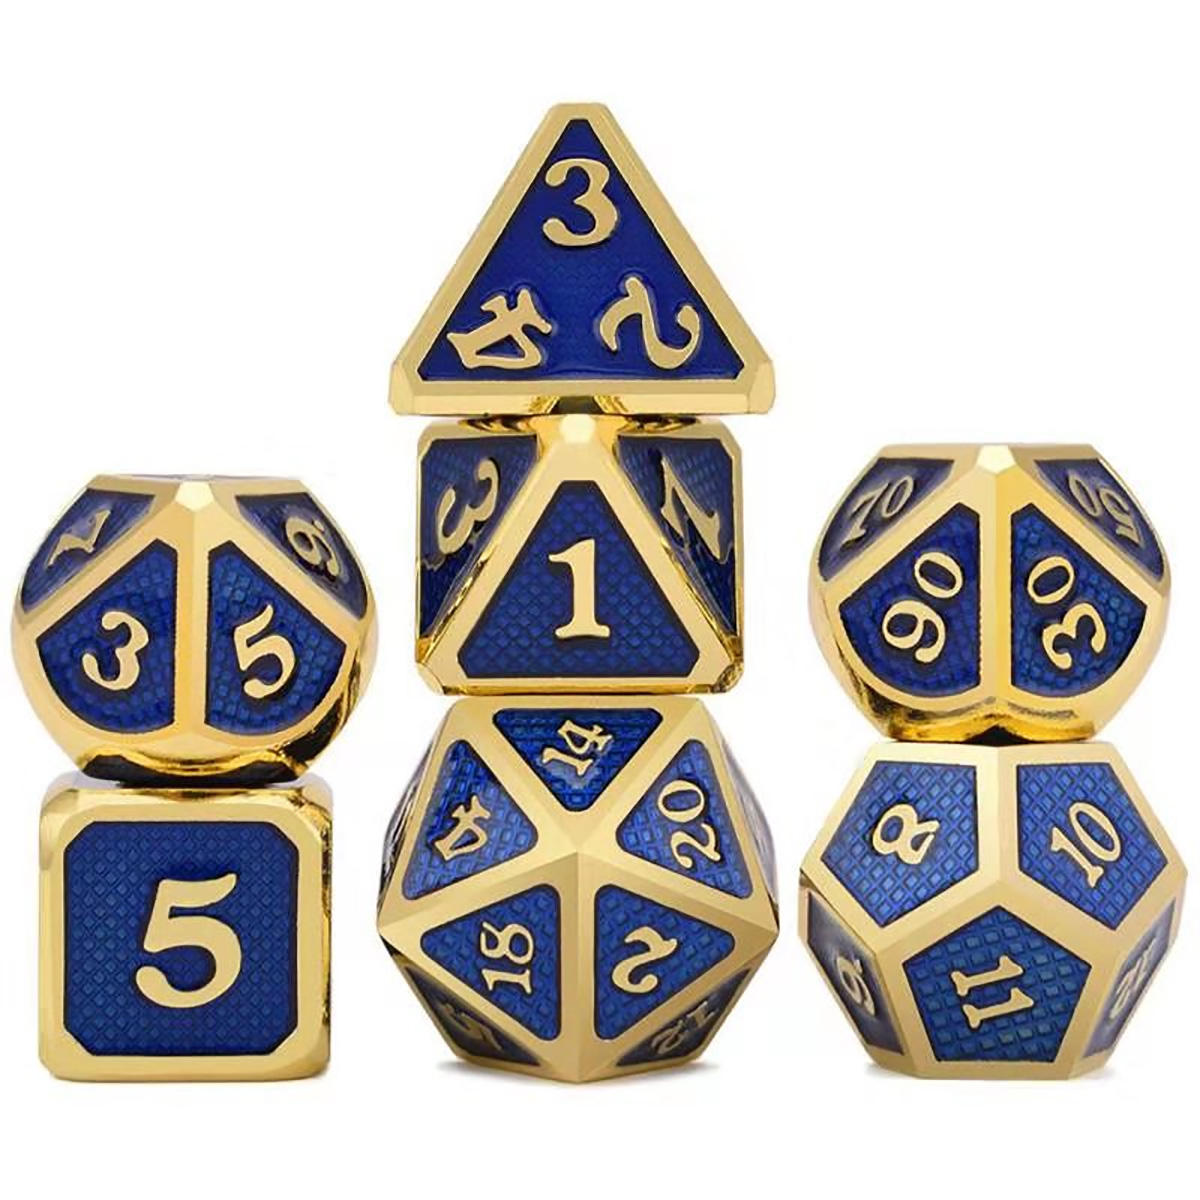 

7 Pcs/Set Alloy Metal Dice Set Playing Game Poker Card Dungeons Dragons Party Board Game Toy